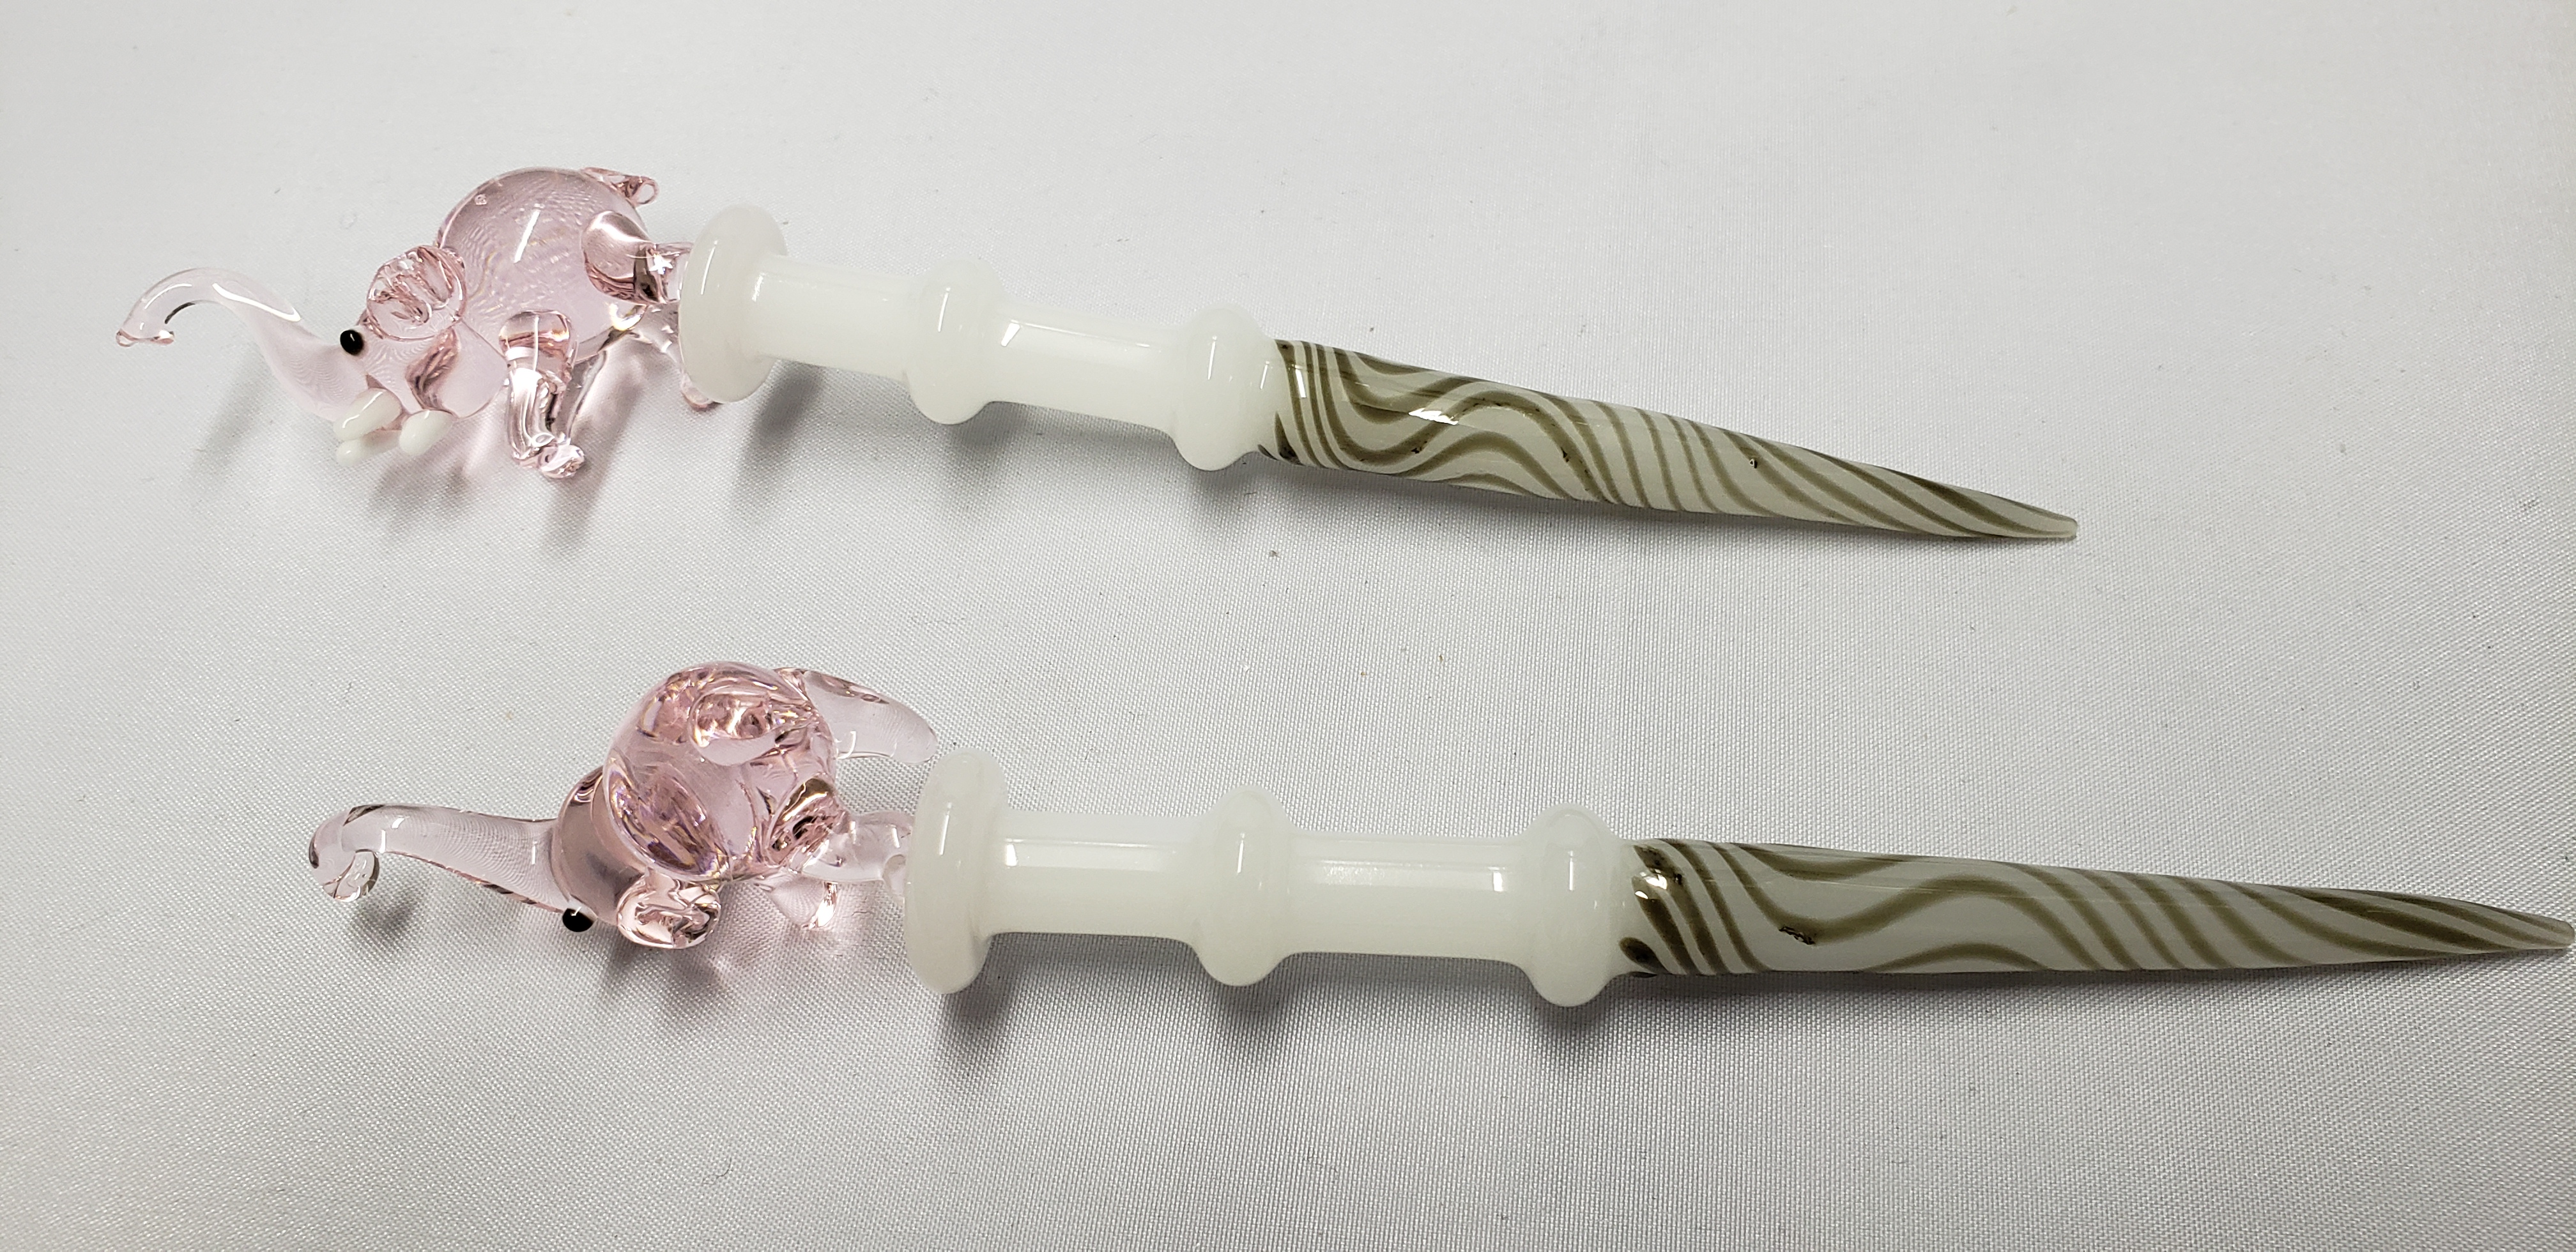 Dabbers-6"-Pink Elephant on Top Glass Dabbers #DEL